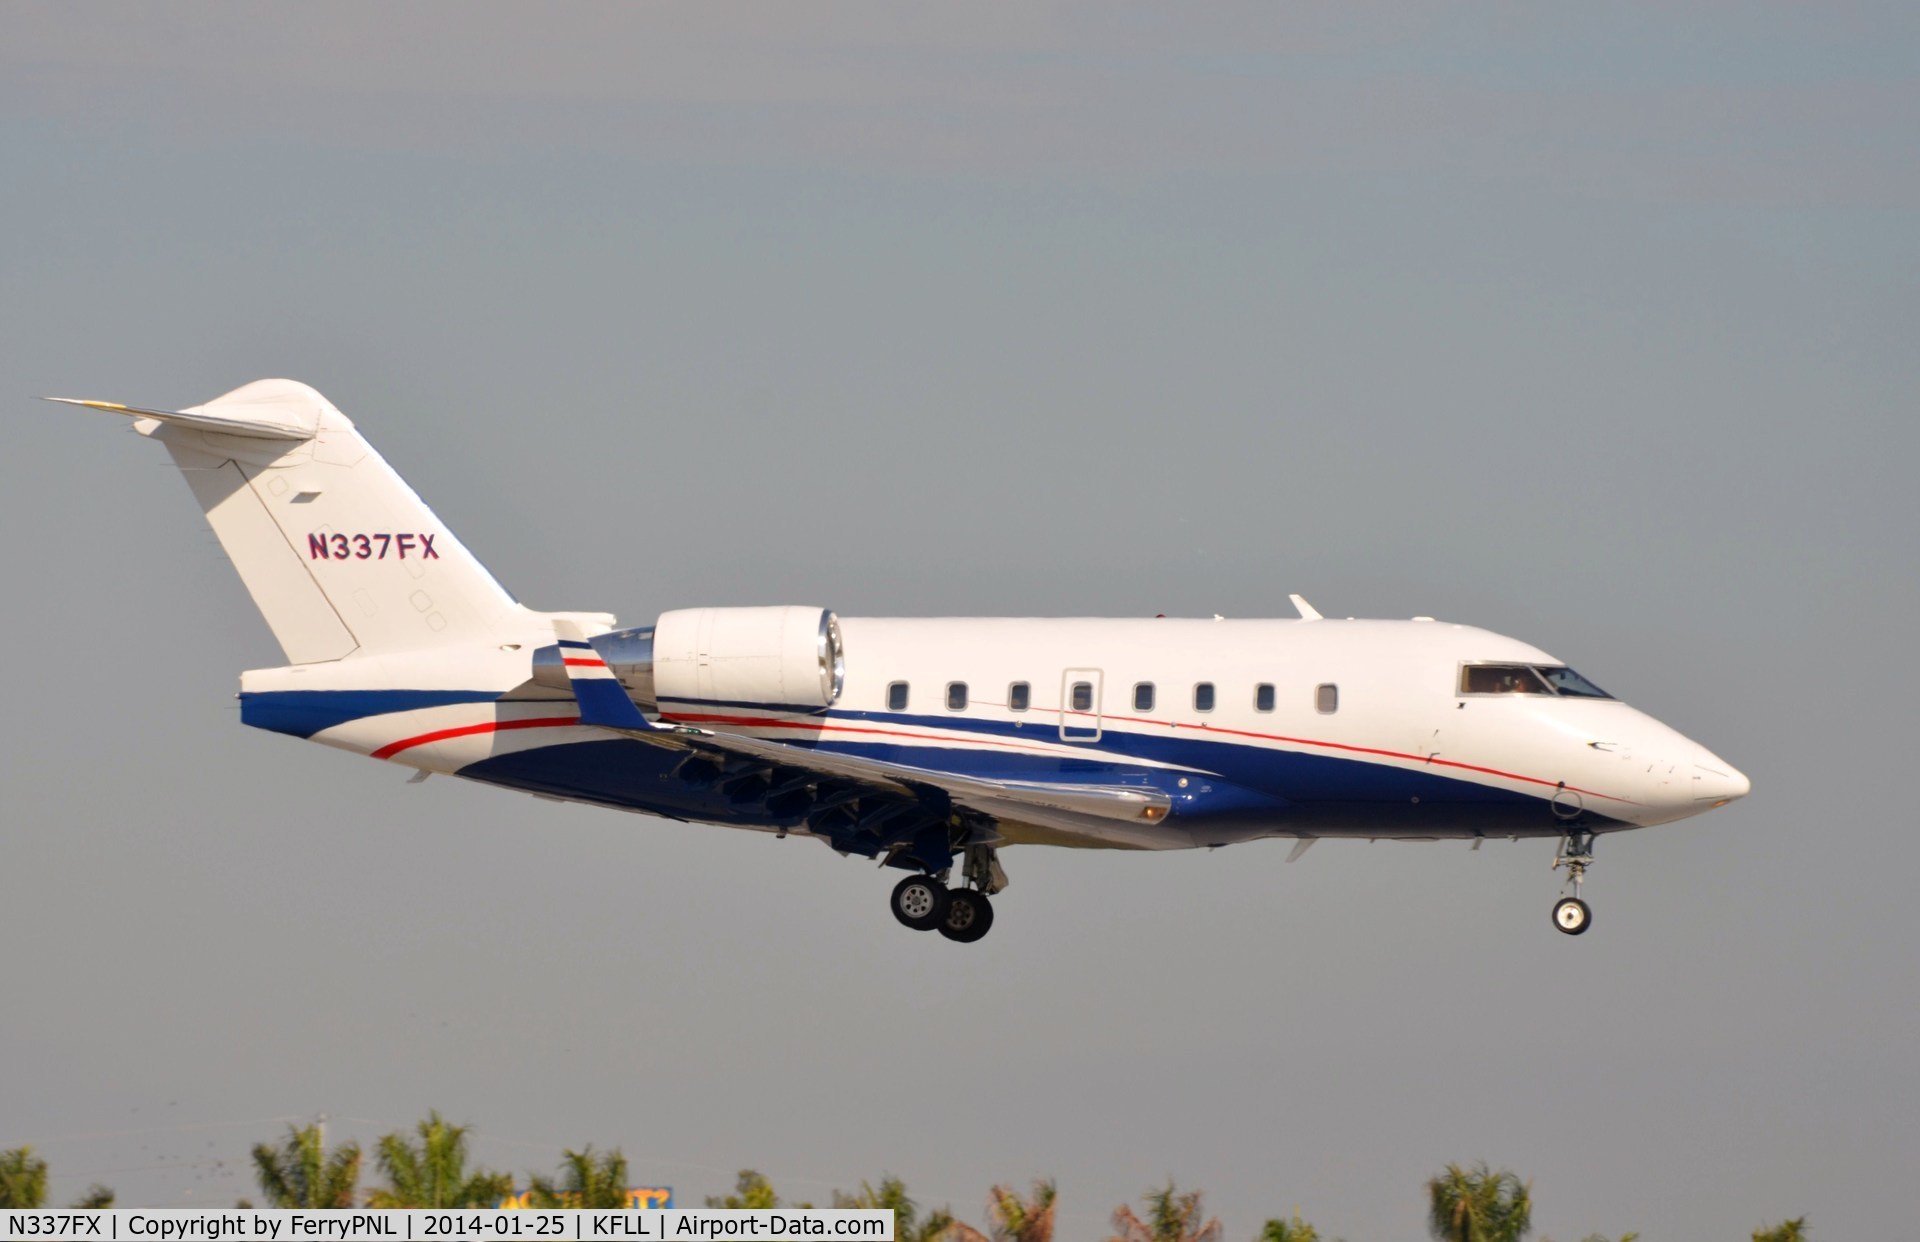 N337FX, 2006 Bombardier Challenger 604 (CL-600-2B16) C/N 5647, Bombardier Flight Solutions CL604